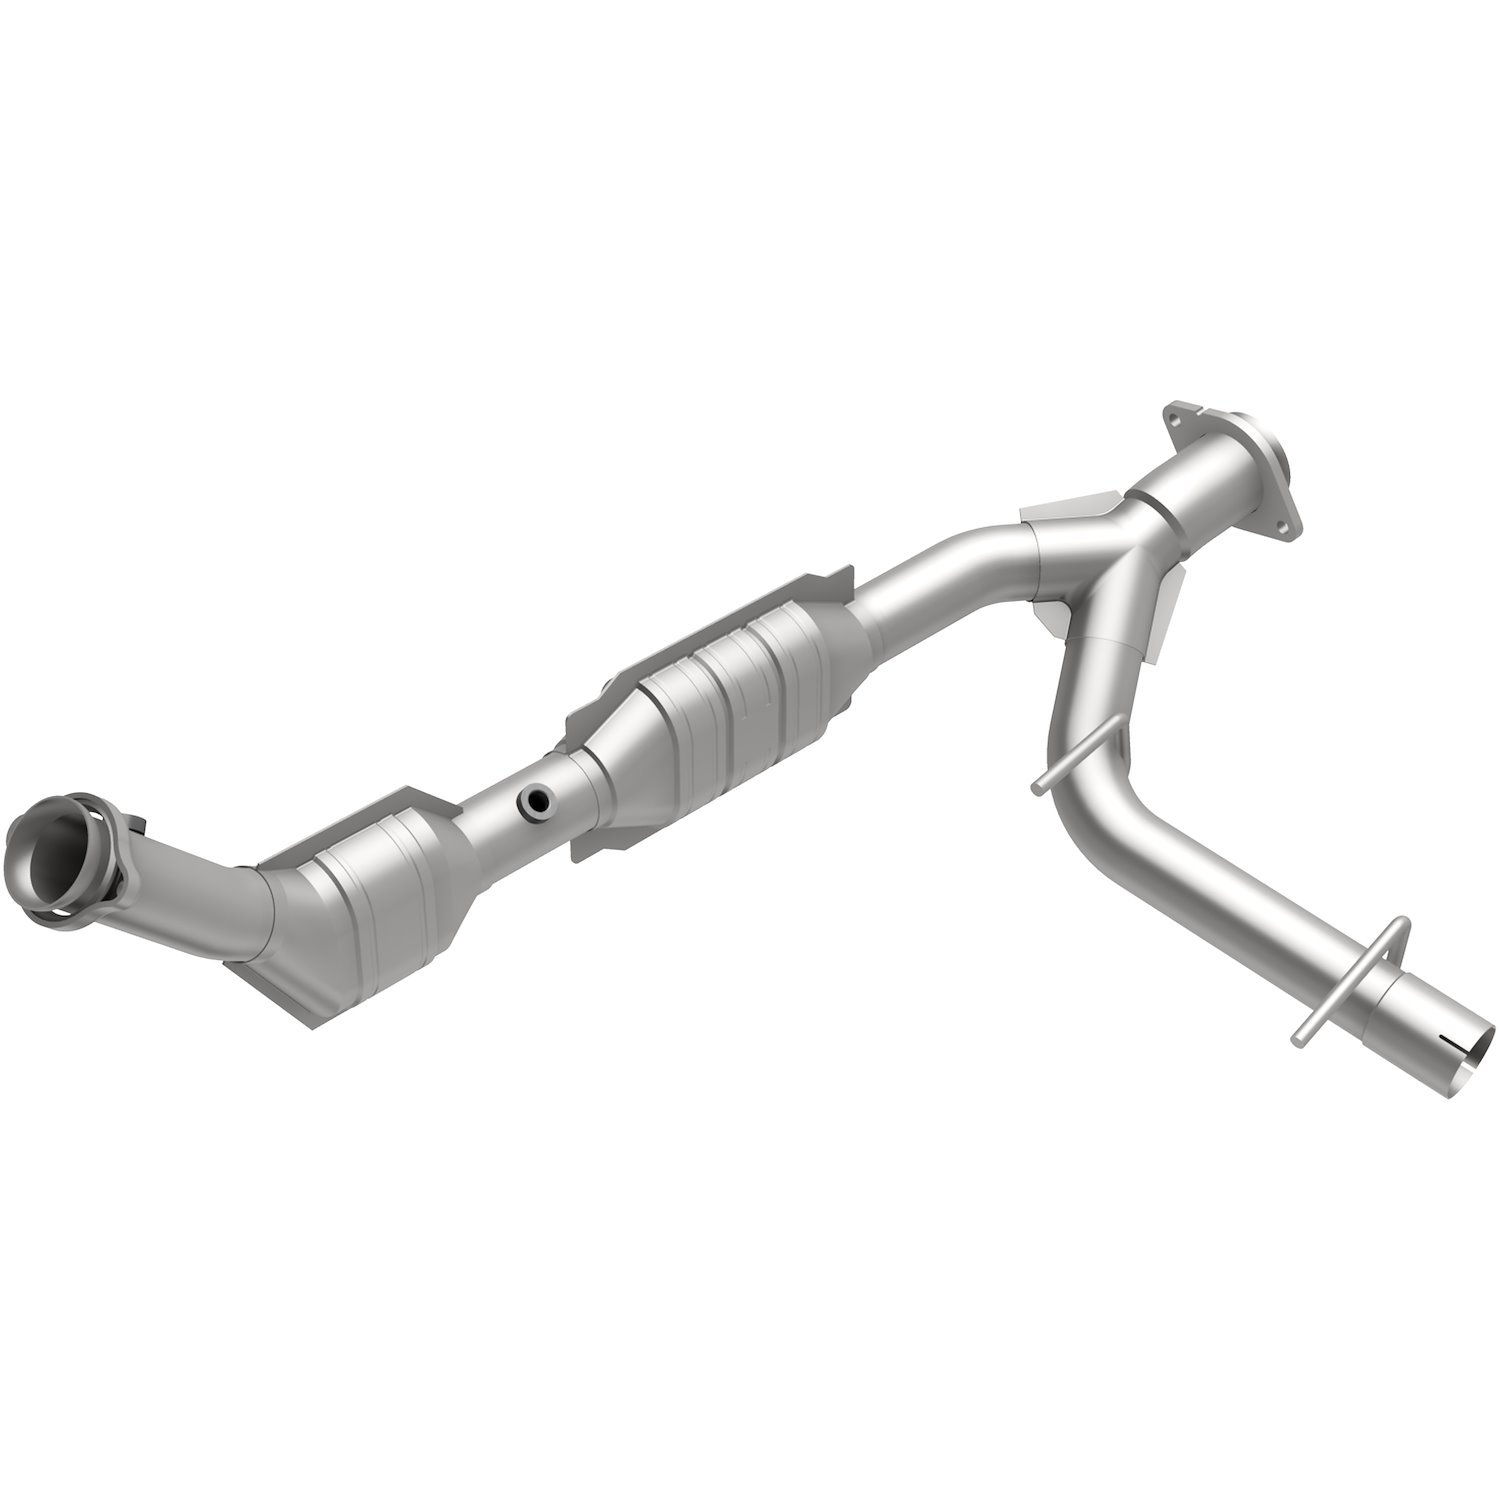 2003-2004 Ford Expedition OEM Grade Federal / EPA Compliant Direct-Fit Catalytic Converter